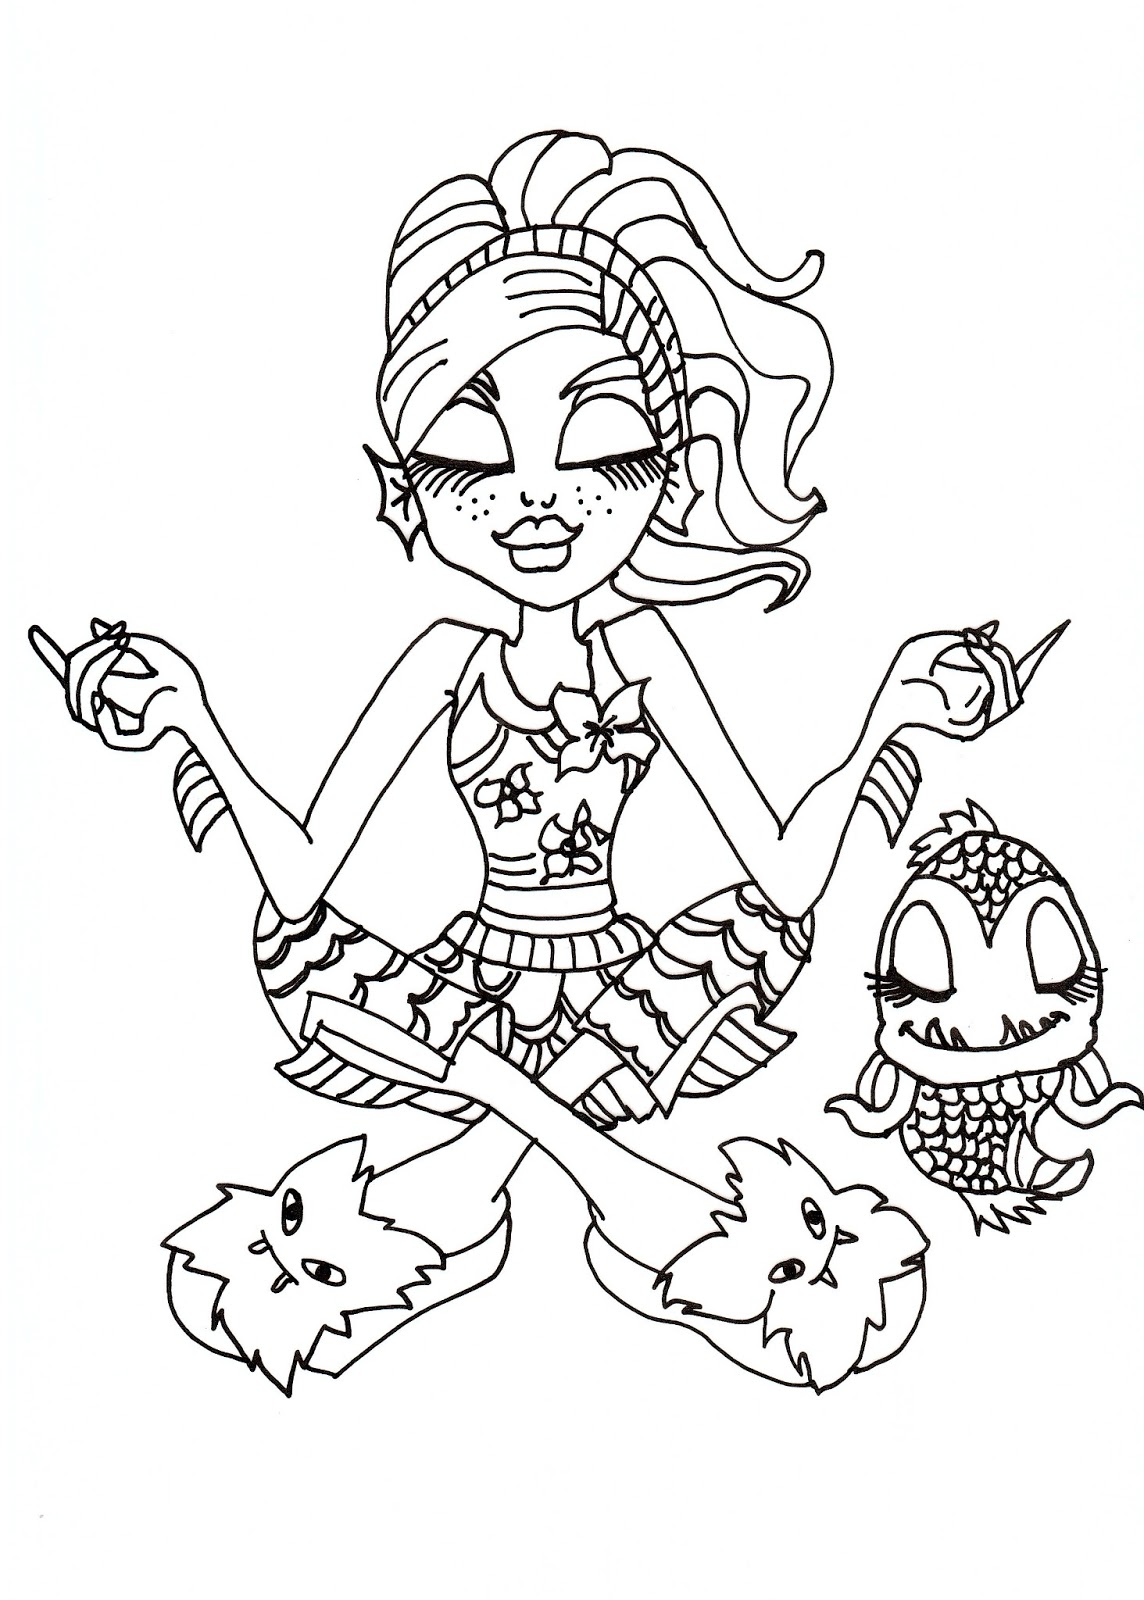 Free Printable Monster High Coloring Pages: October 2012